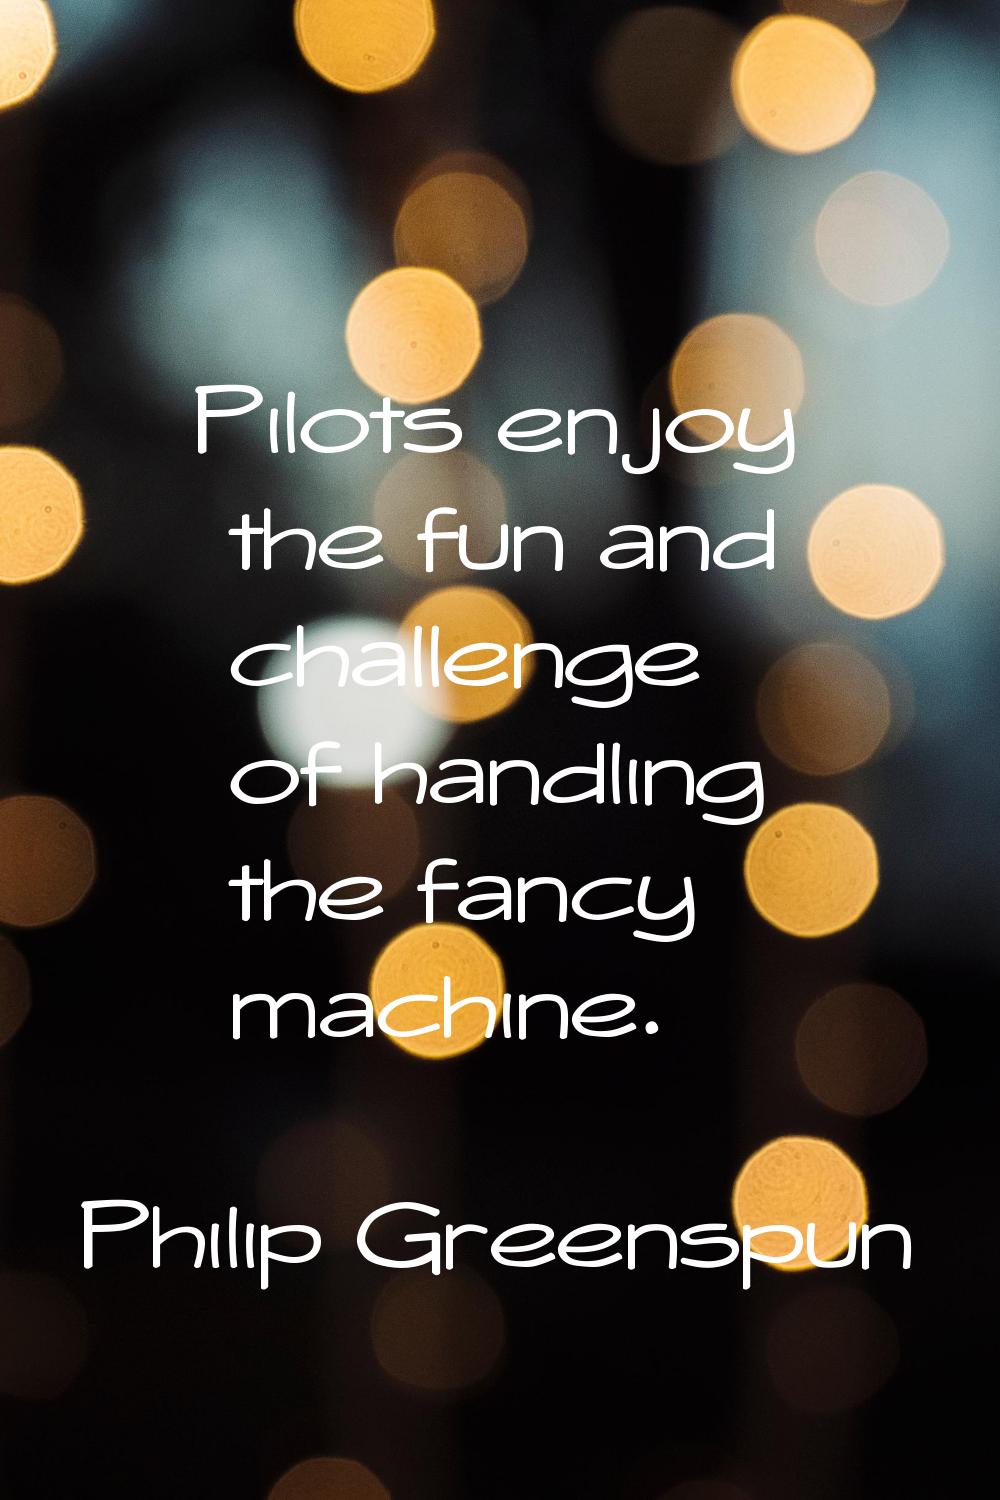 Pilots enjoy the fun and challenge of handling the fancy machine.